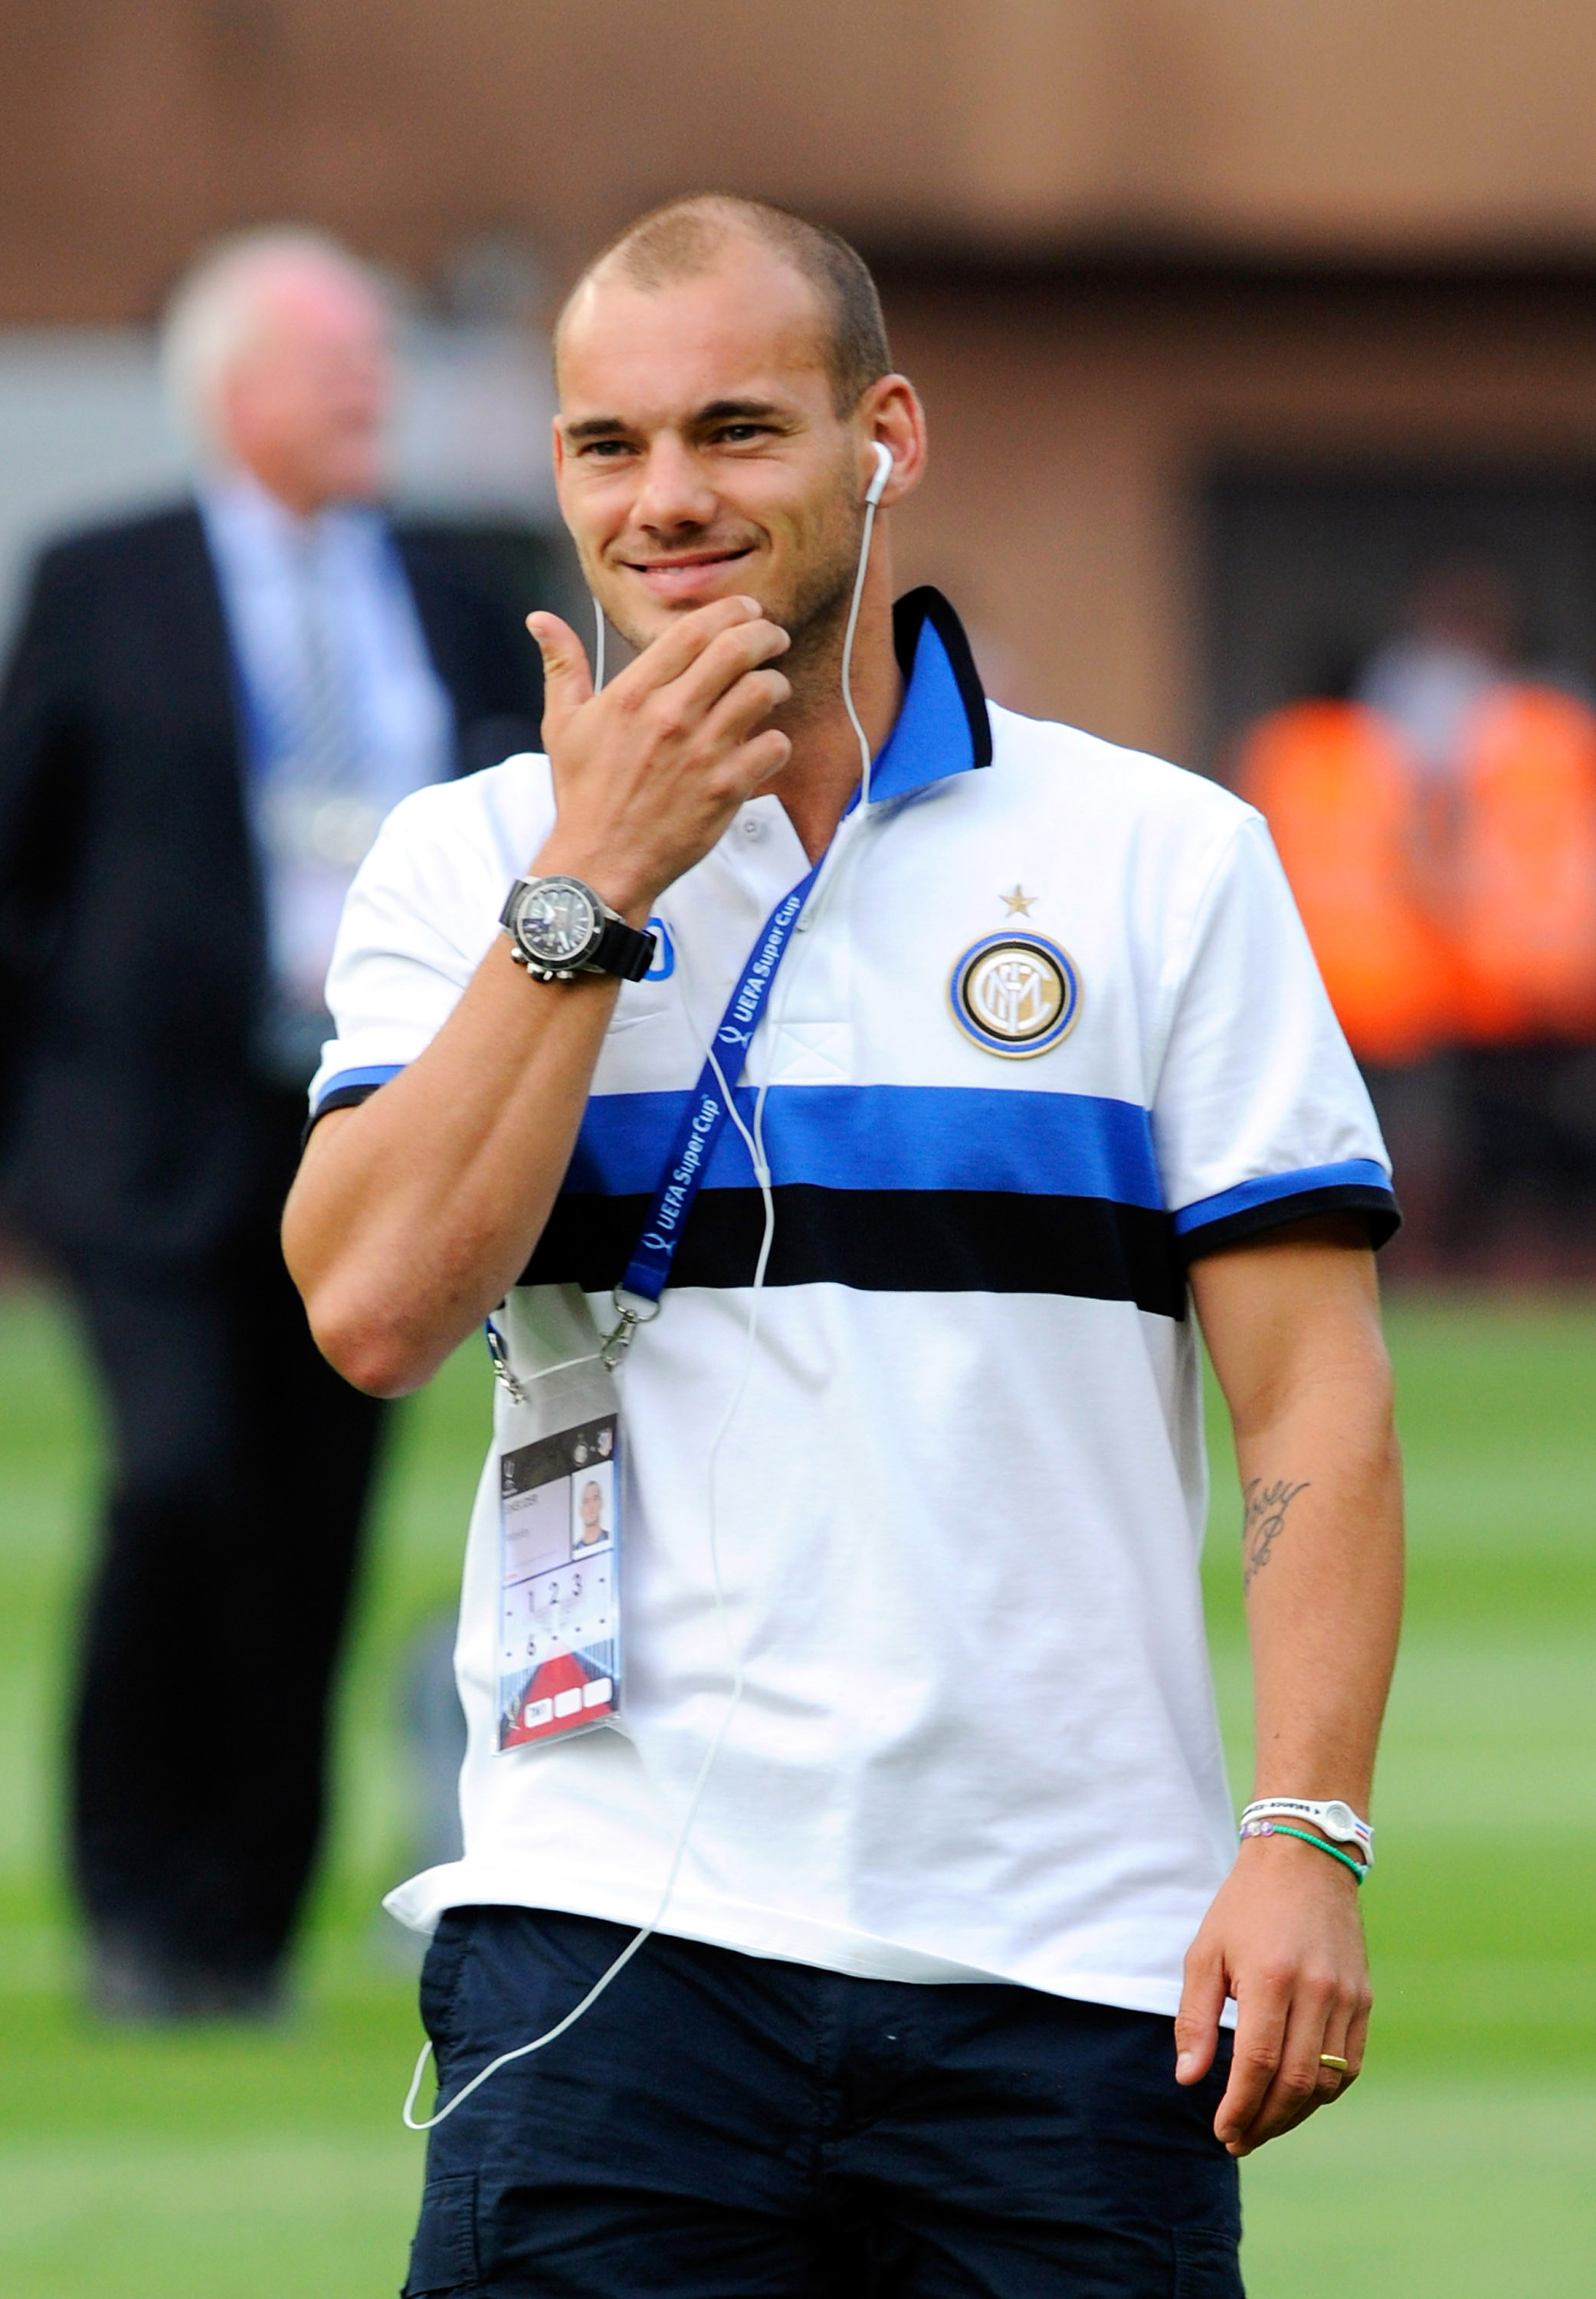 MONACO - AUGUST 27:  Wesley Snejider of Inter Milan smiles before the UEFA Super Cup match between Inter Milan and Atletico Madrid at Louis II Stadium on August 27, 2010 in Monaco, Monaco.  (Photo by Claudio Villa/Getty Images)